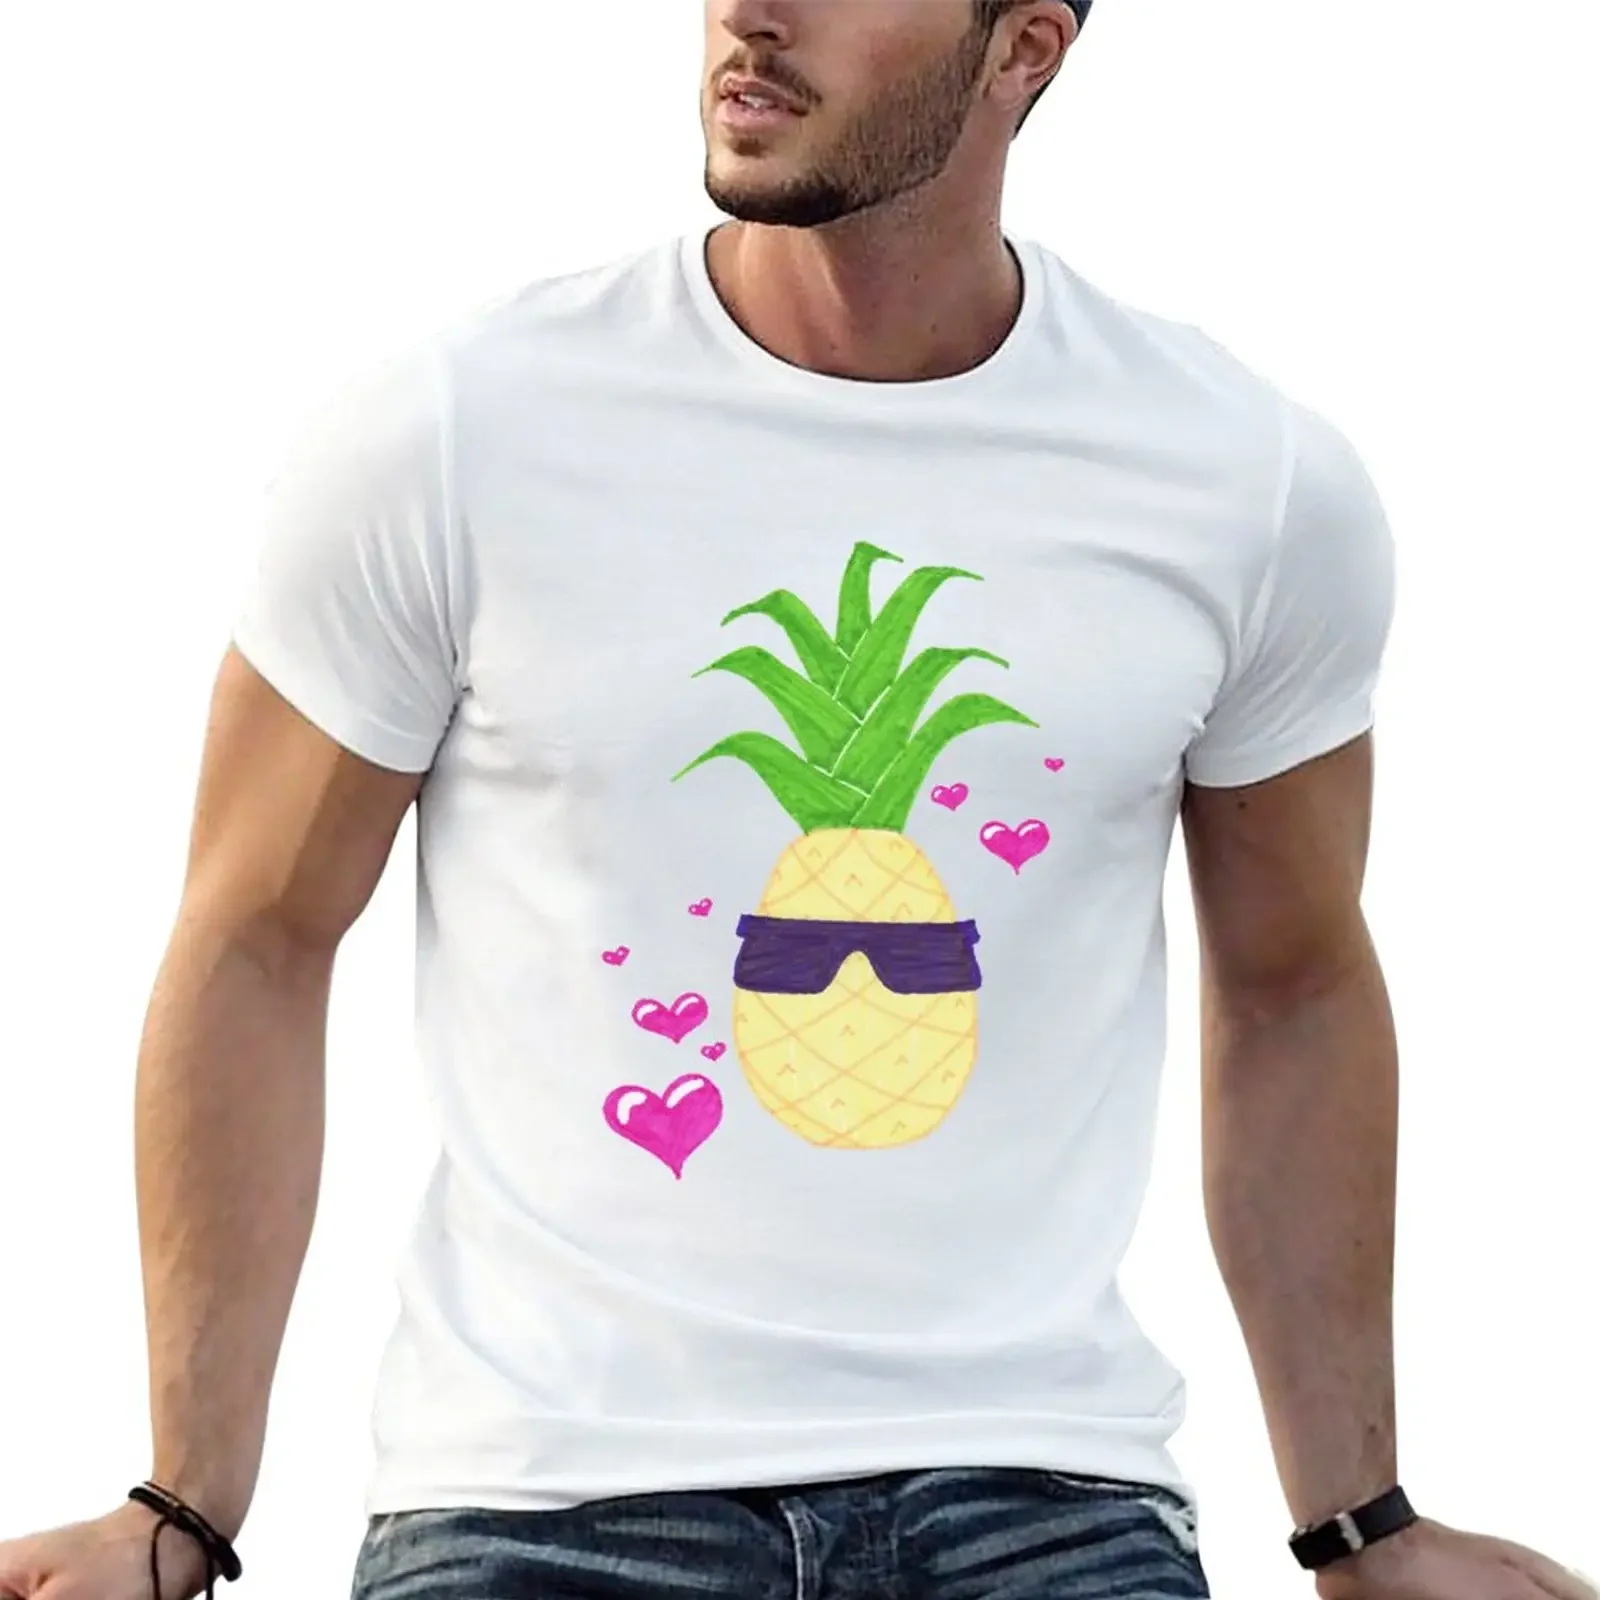 

Cool Pineapple T-Shirt for a boy plus size tops men clothing